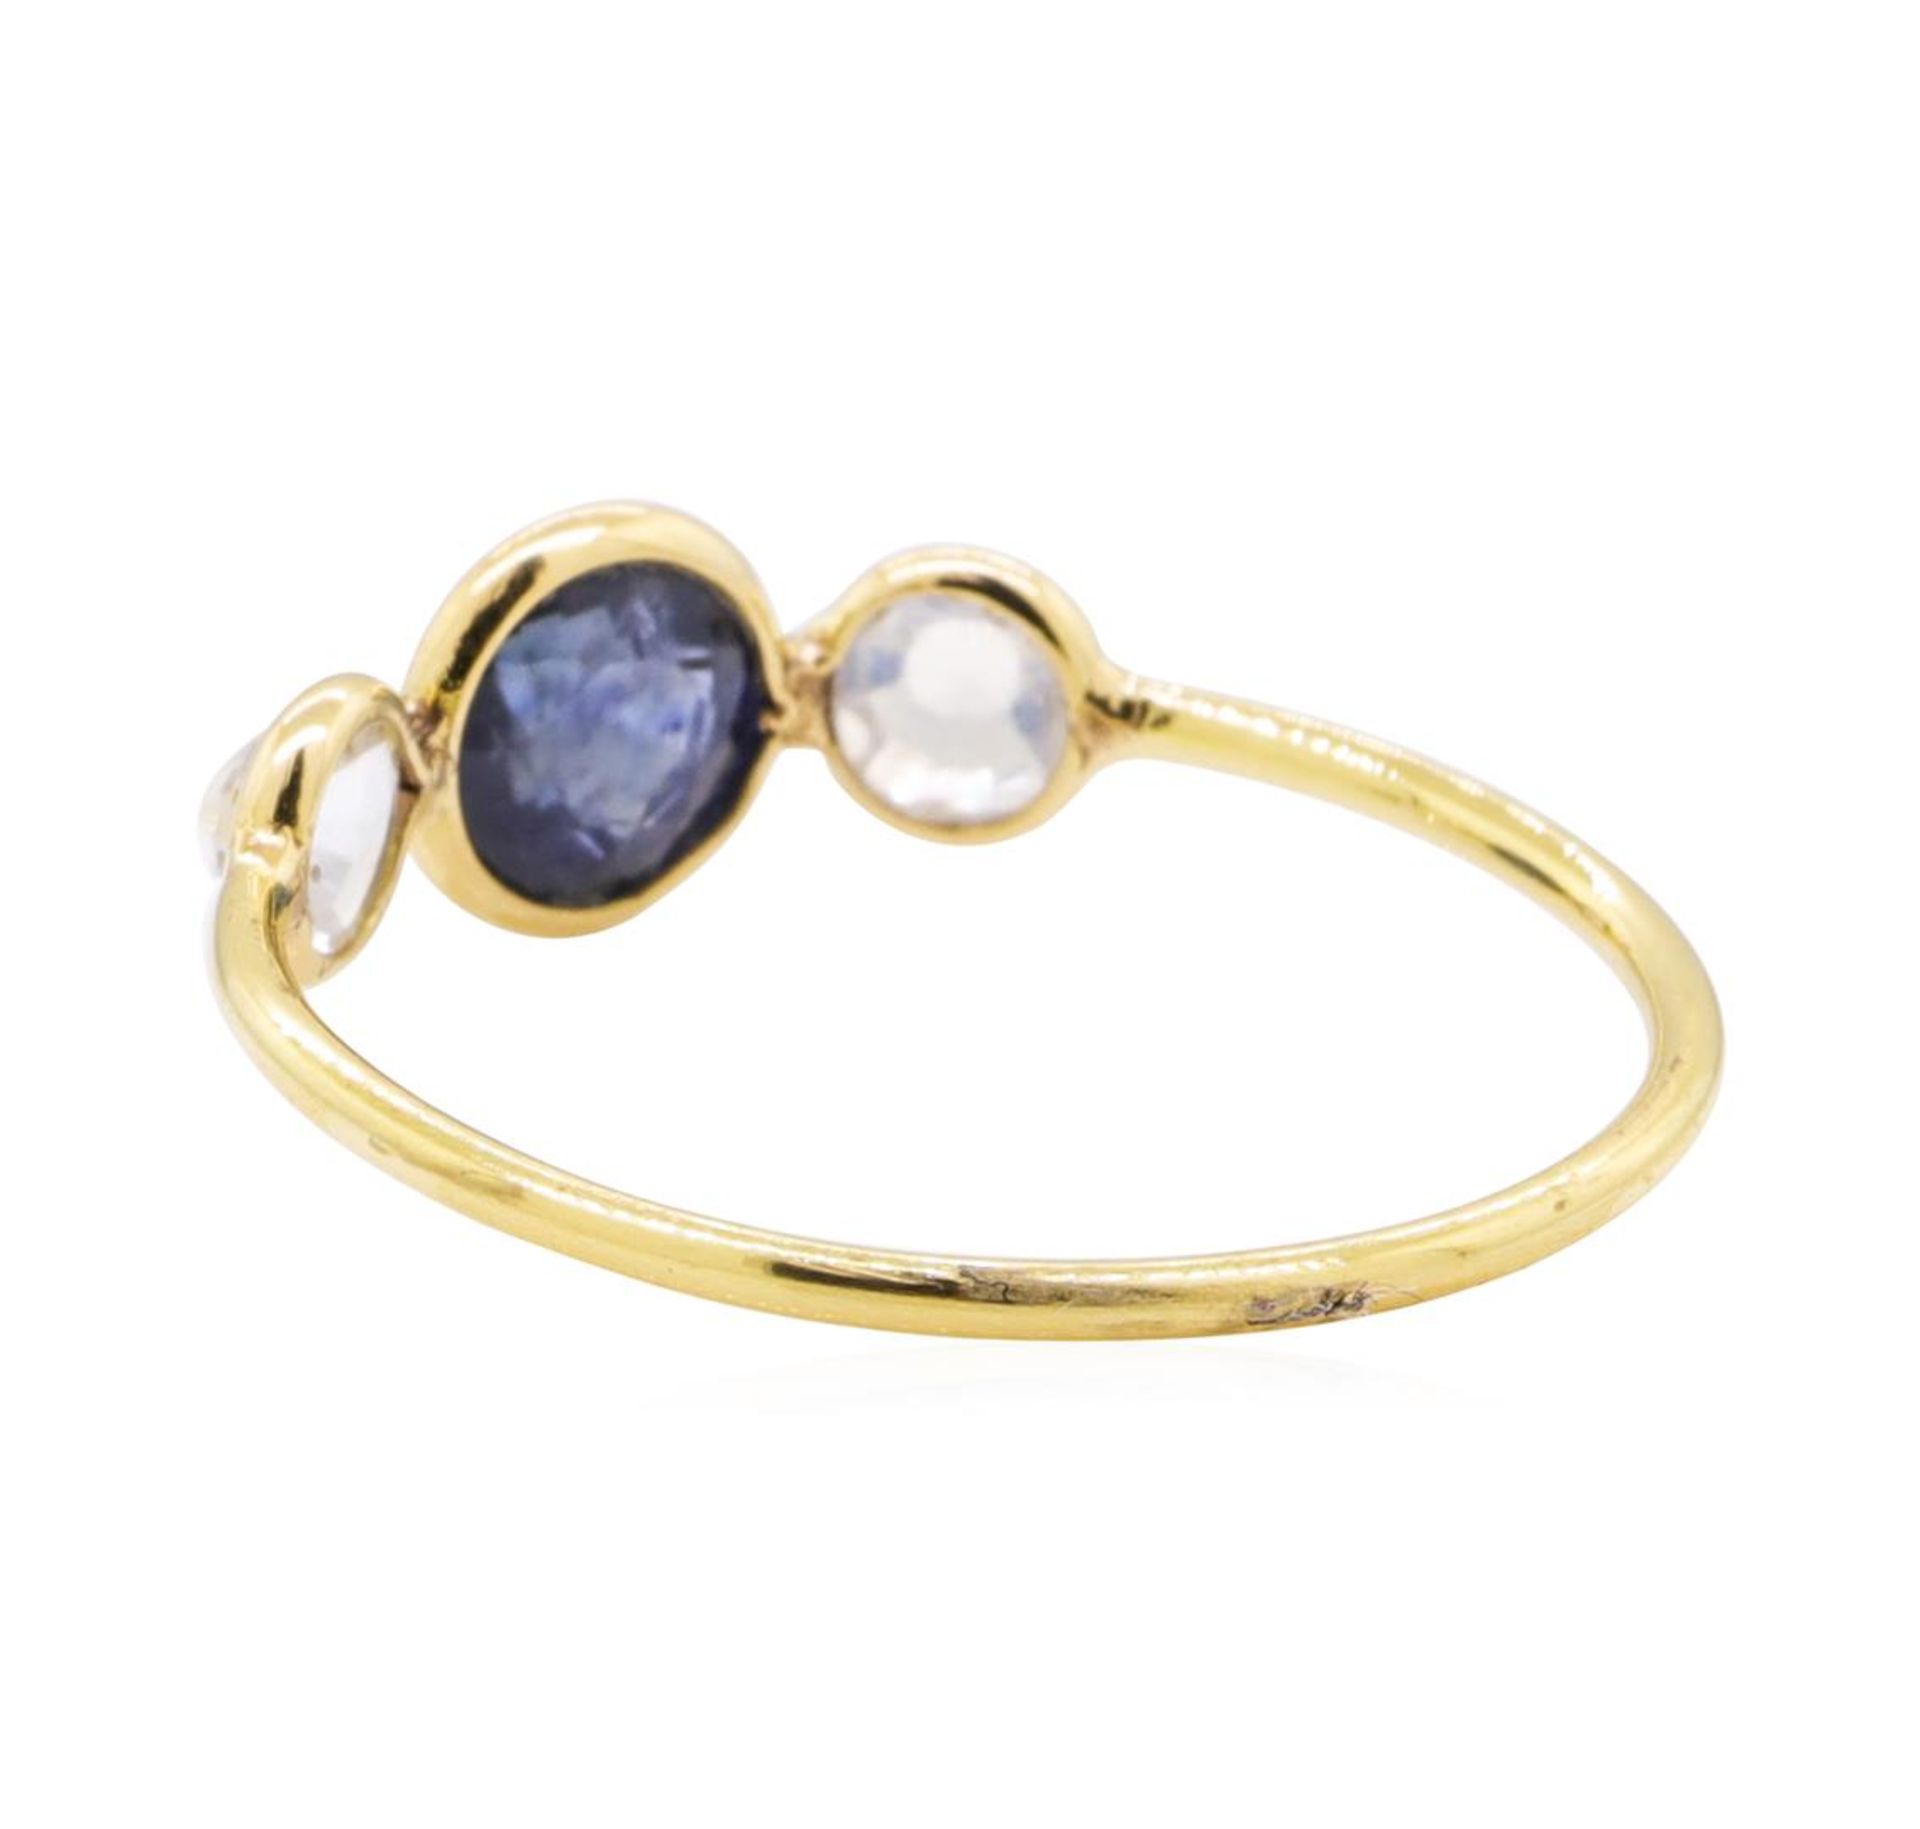 1.20 ctw Sapphire and Moonstone Ring - 18KT Yellow Gold - Image 3 of 4